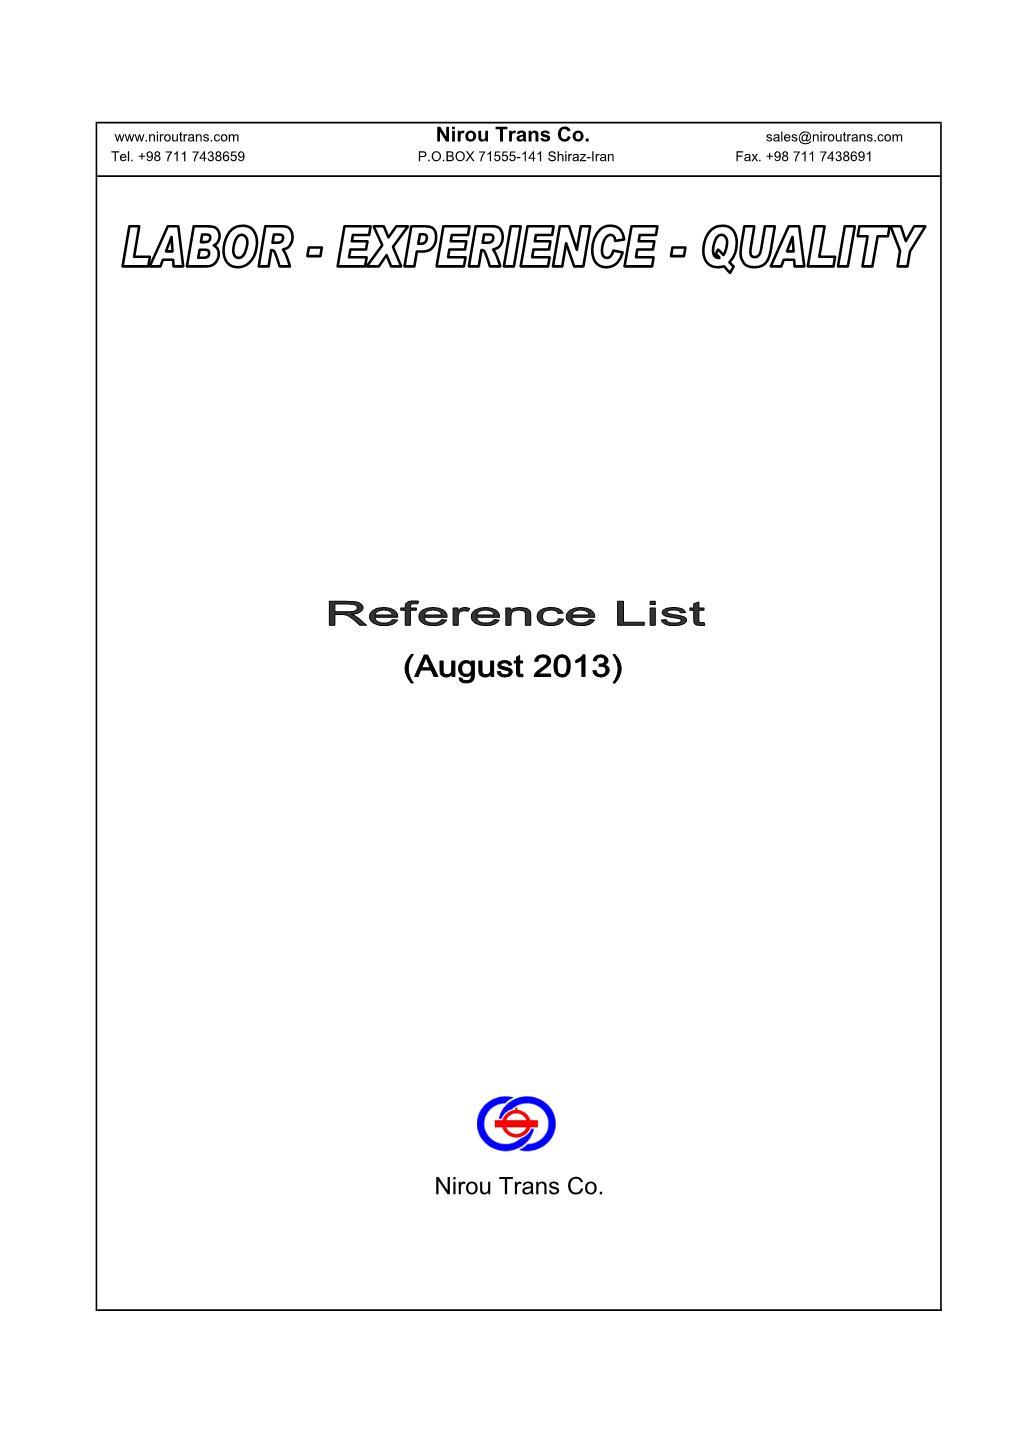 Reference List 2013-Final